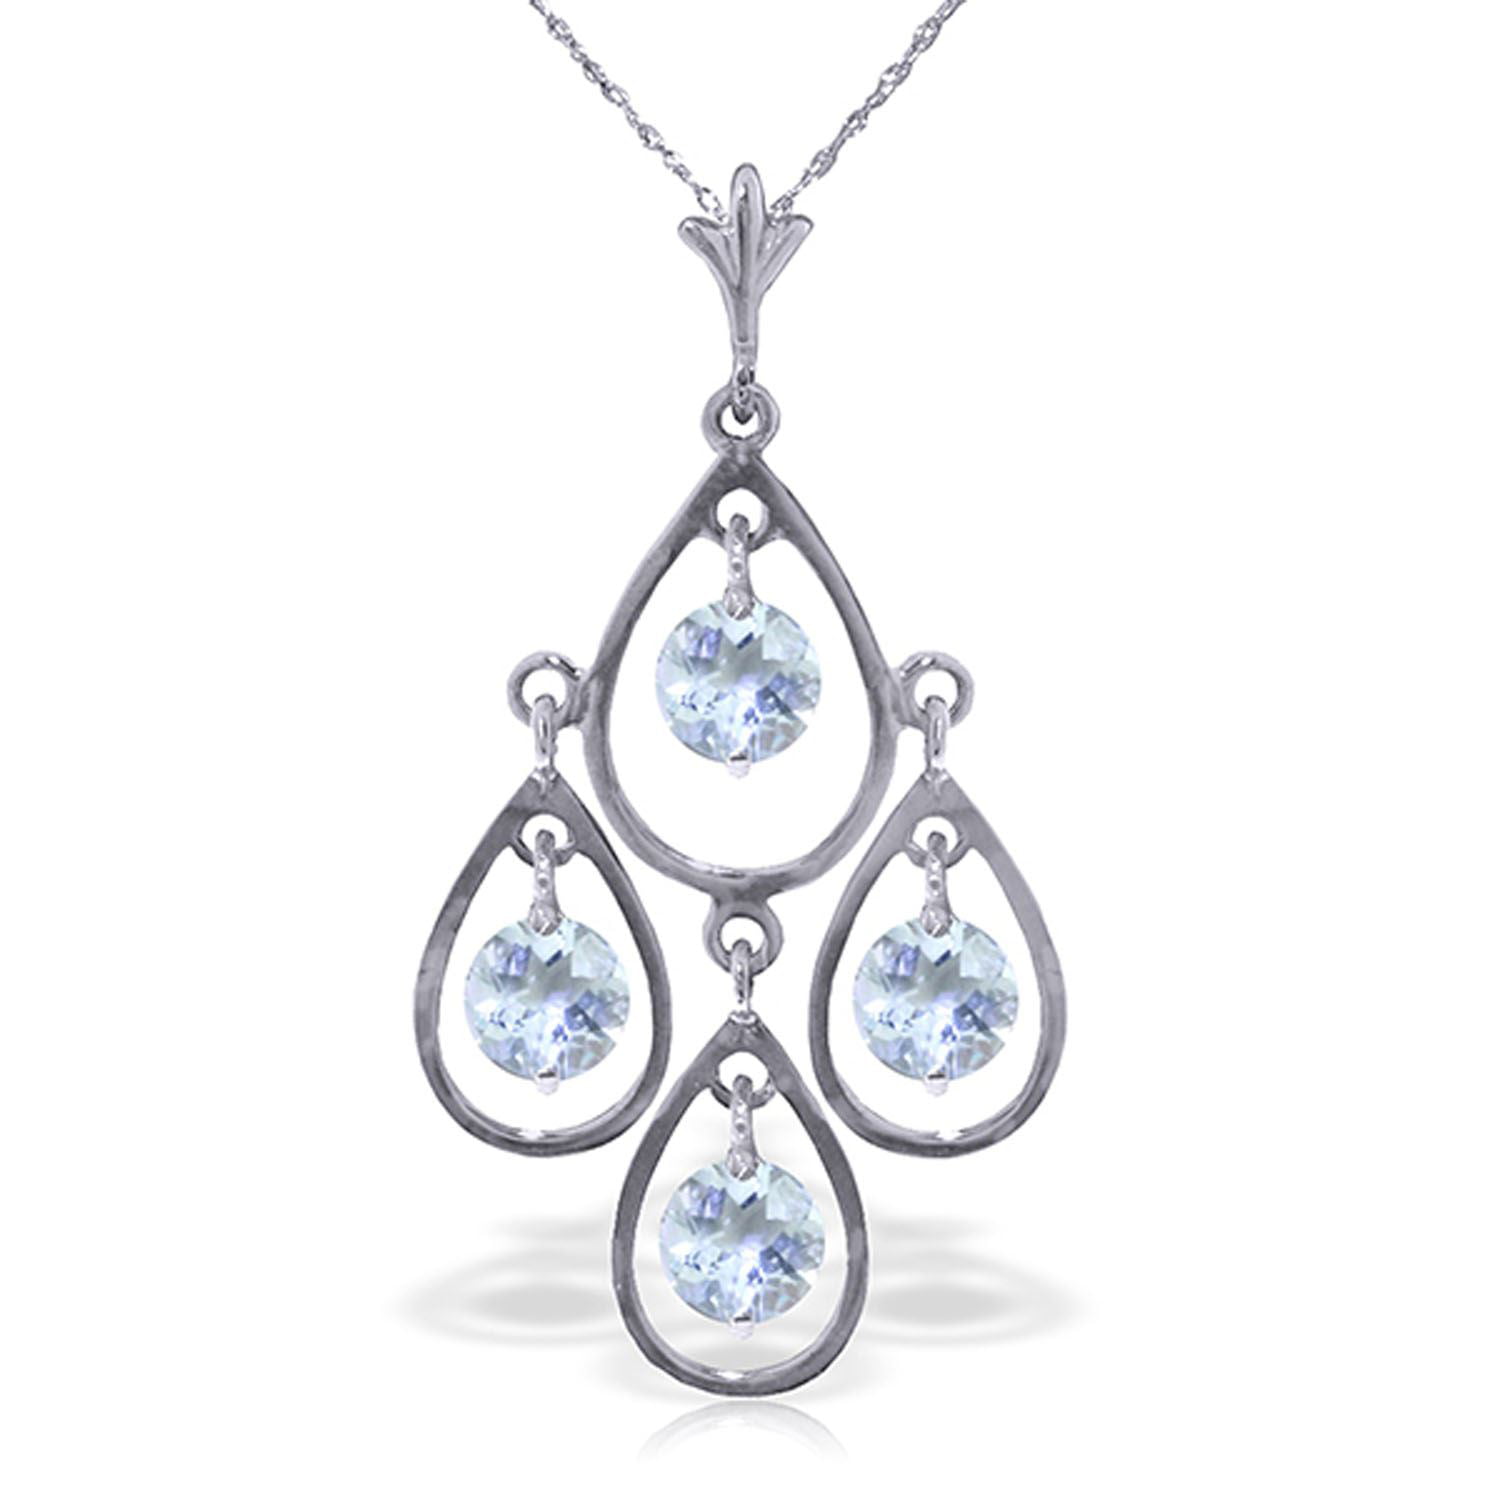 ALARRI 1.95 CTW 14K Solid White Gold Real Mccoy Aquamarine Necklace with 22 Inch Chain Length 